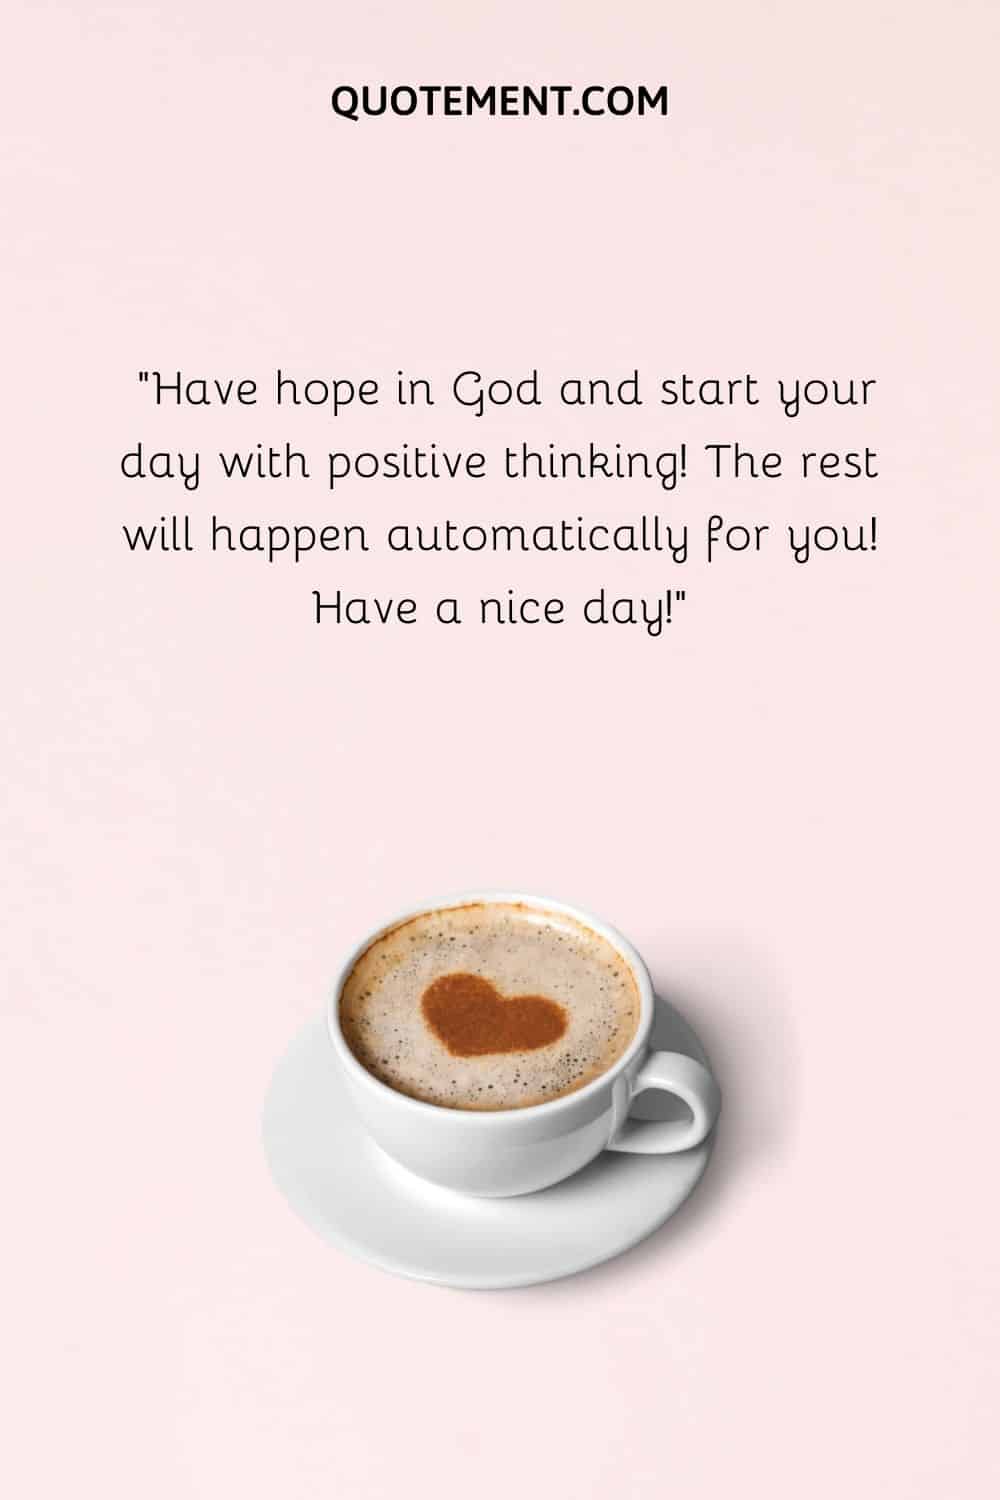 Have hope in God and start your day with positive thinking